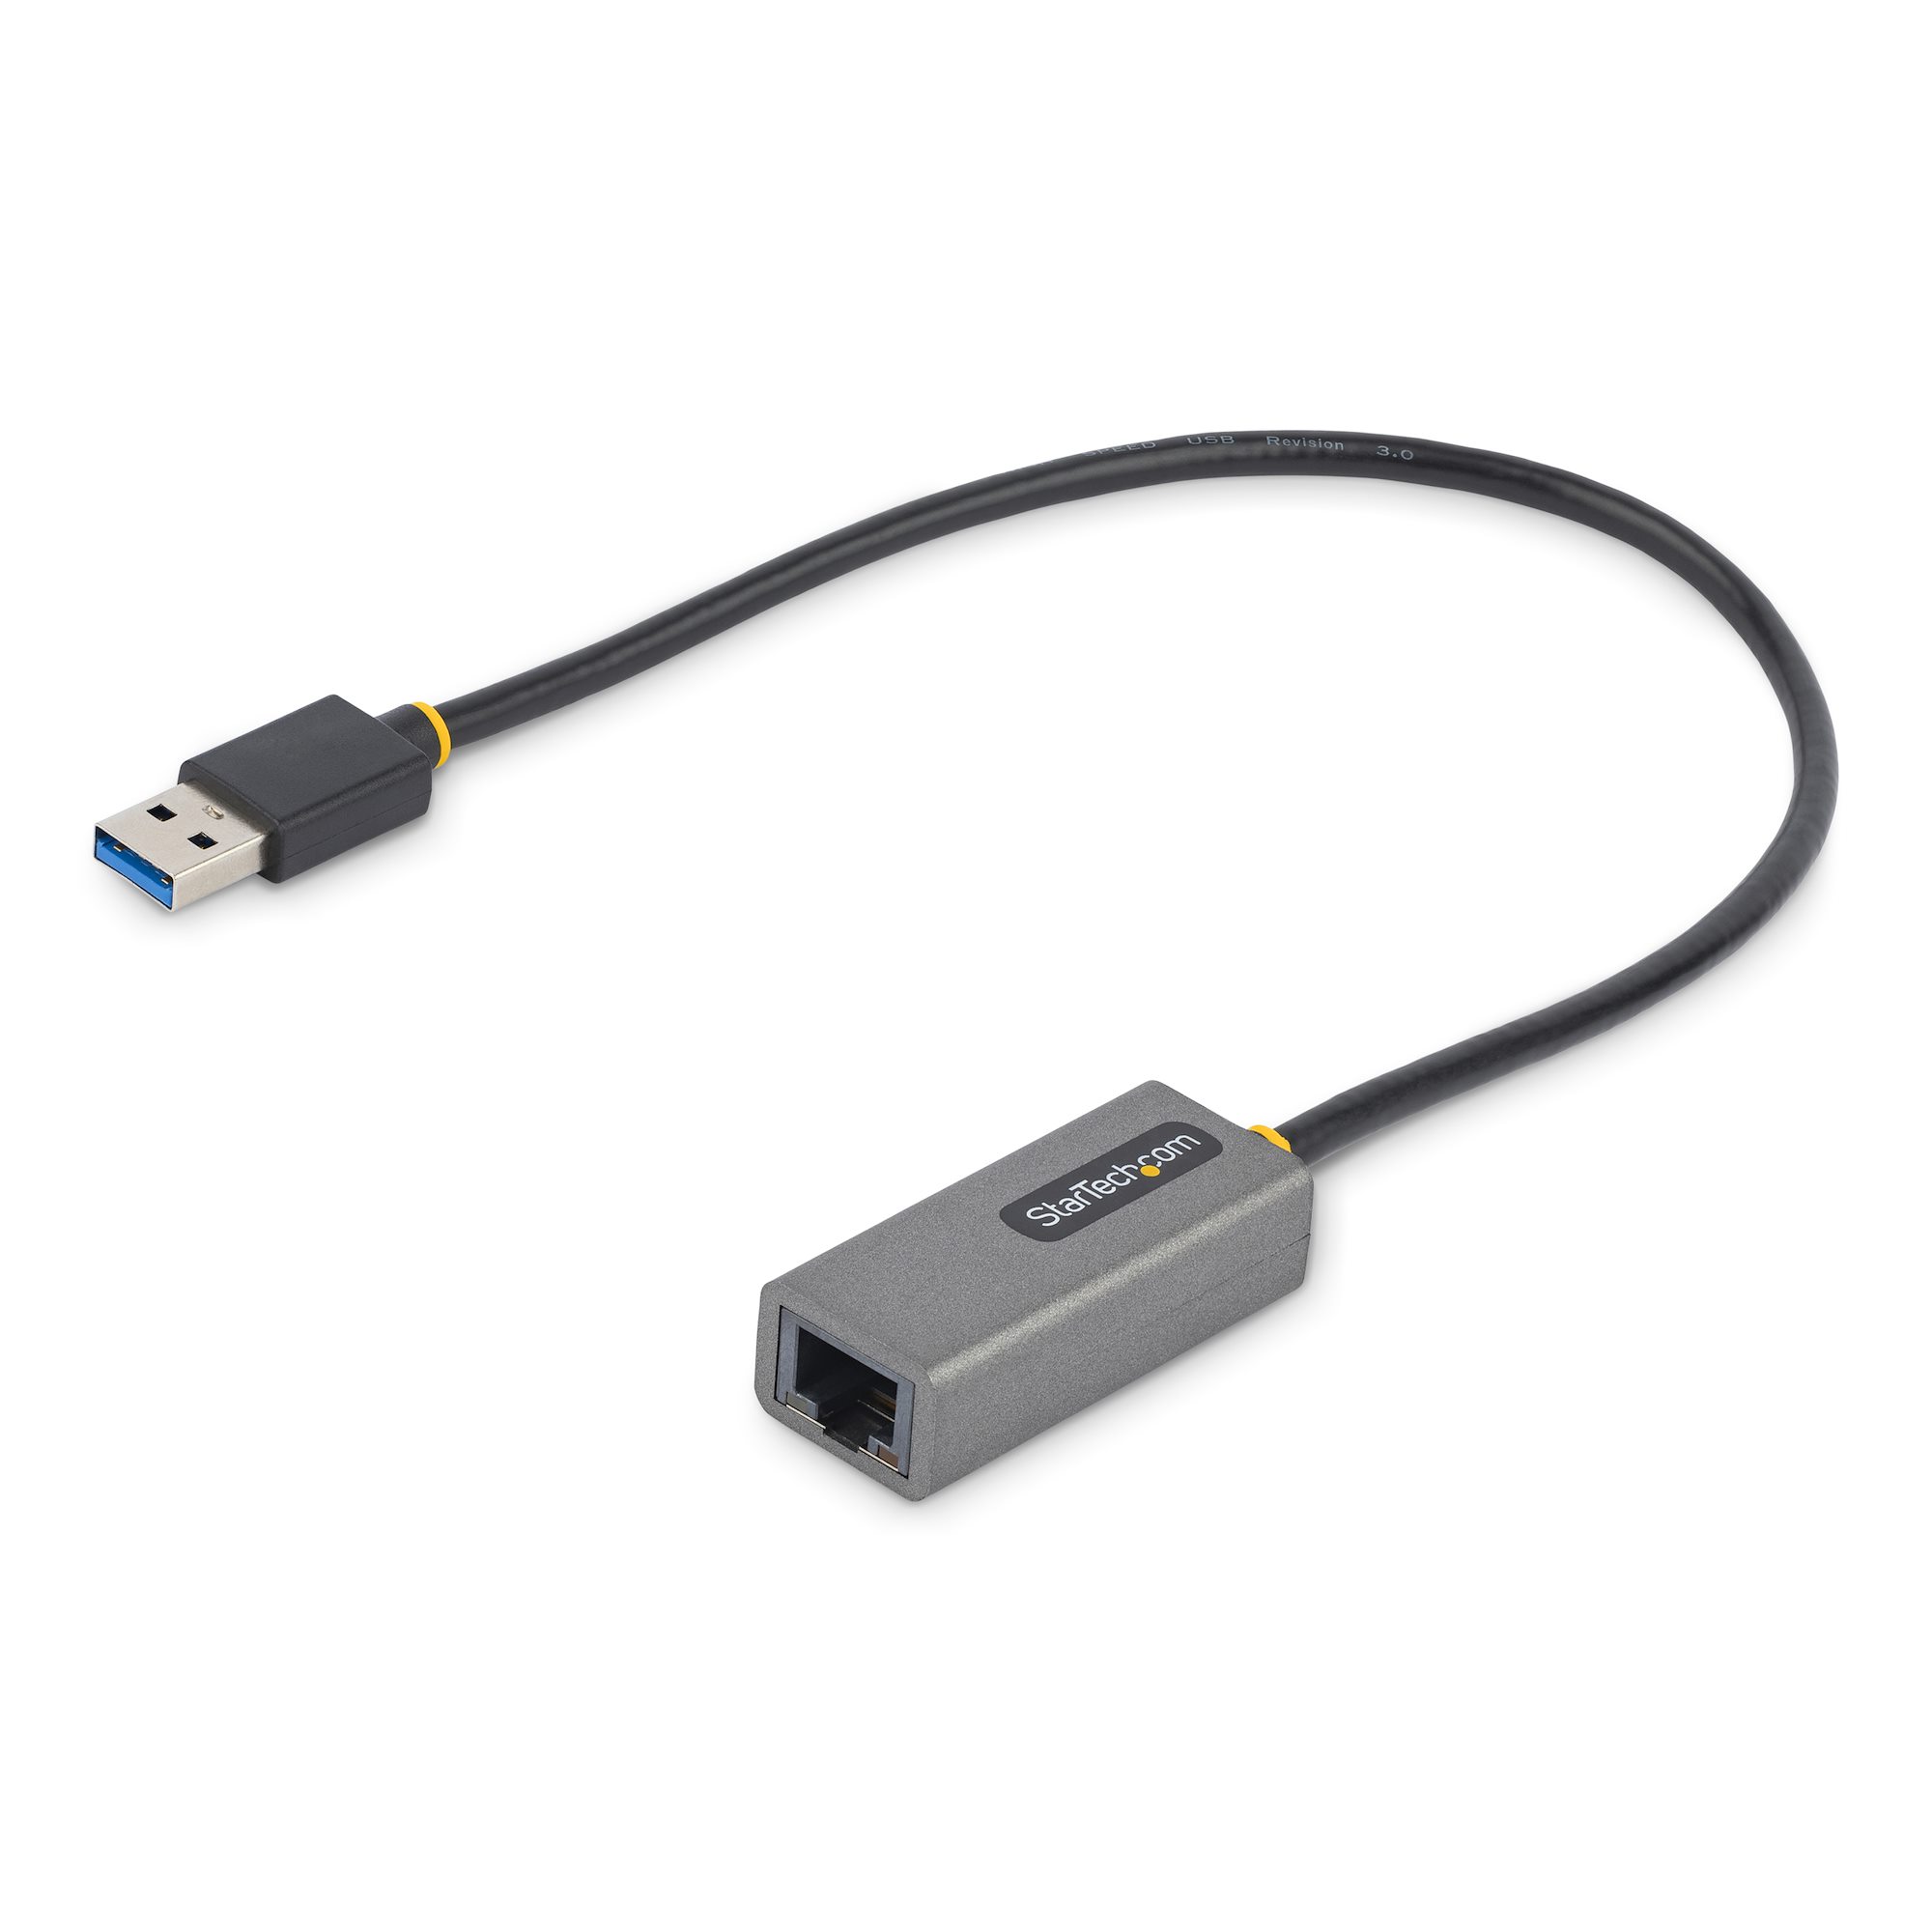 【USB31000S2】USB TO ETHERNET ADAPTER, USB 10/